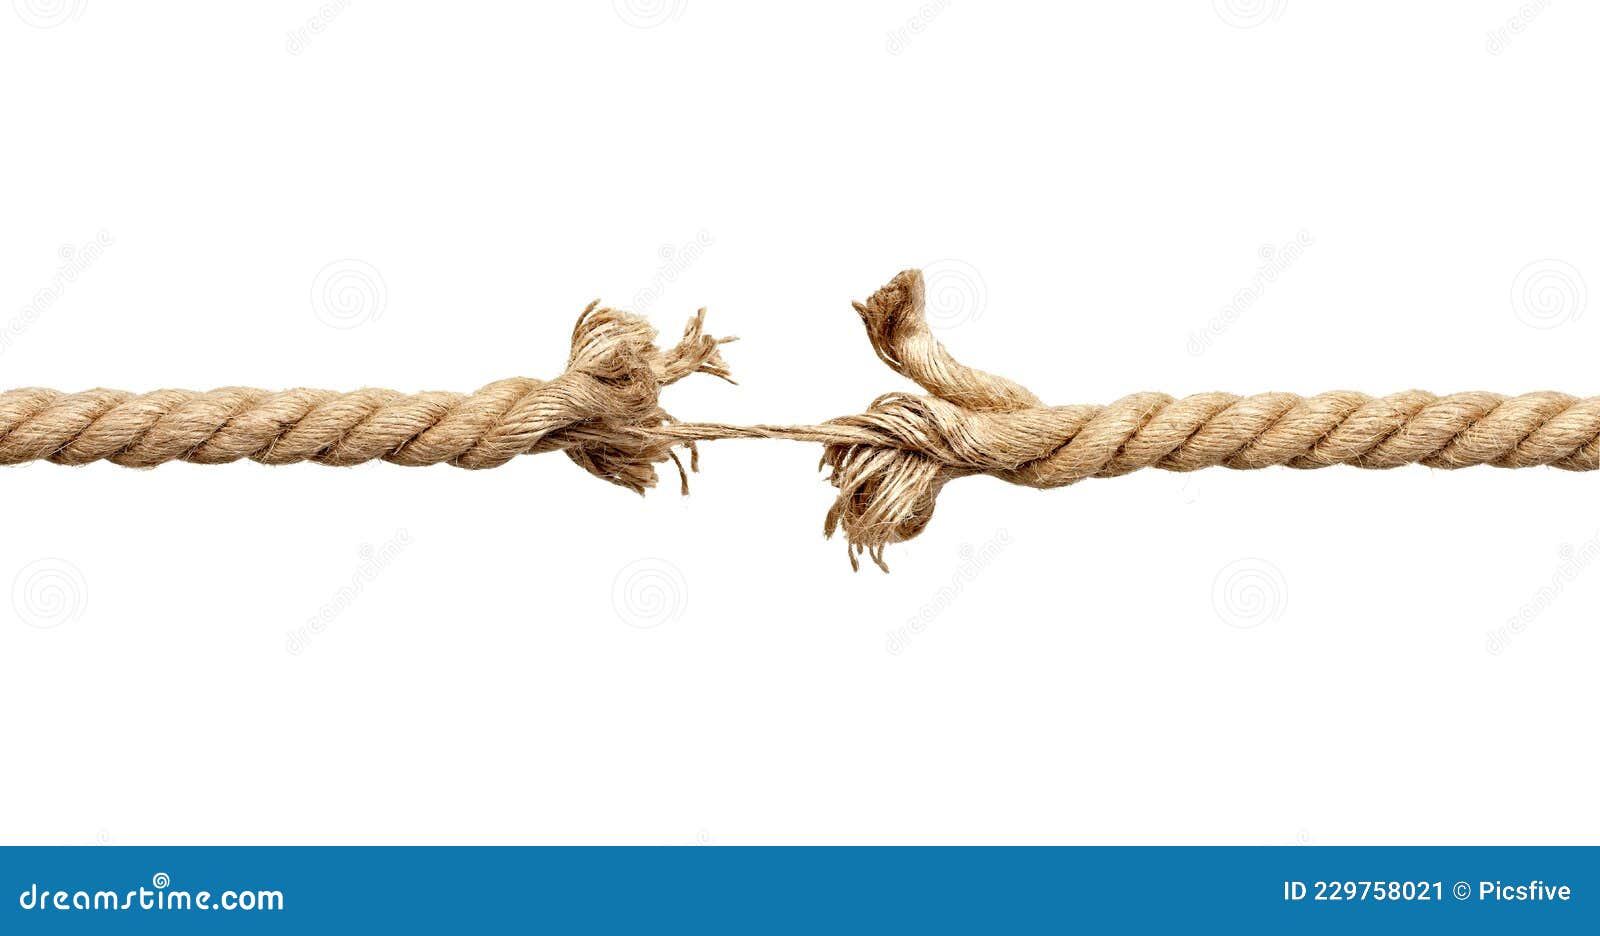 String Rope Cord Pressure Broken Stress Stock Image - Image of competition,  torn: 229758021